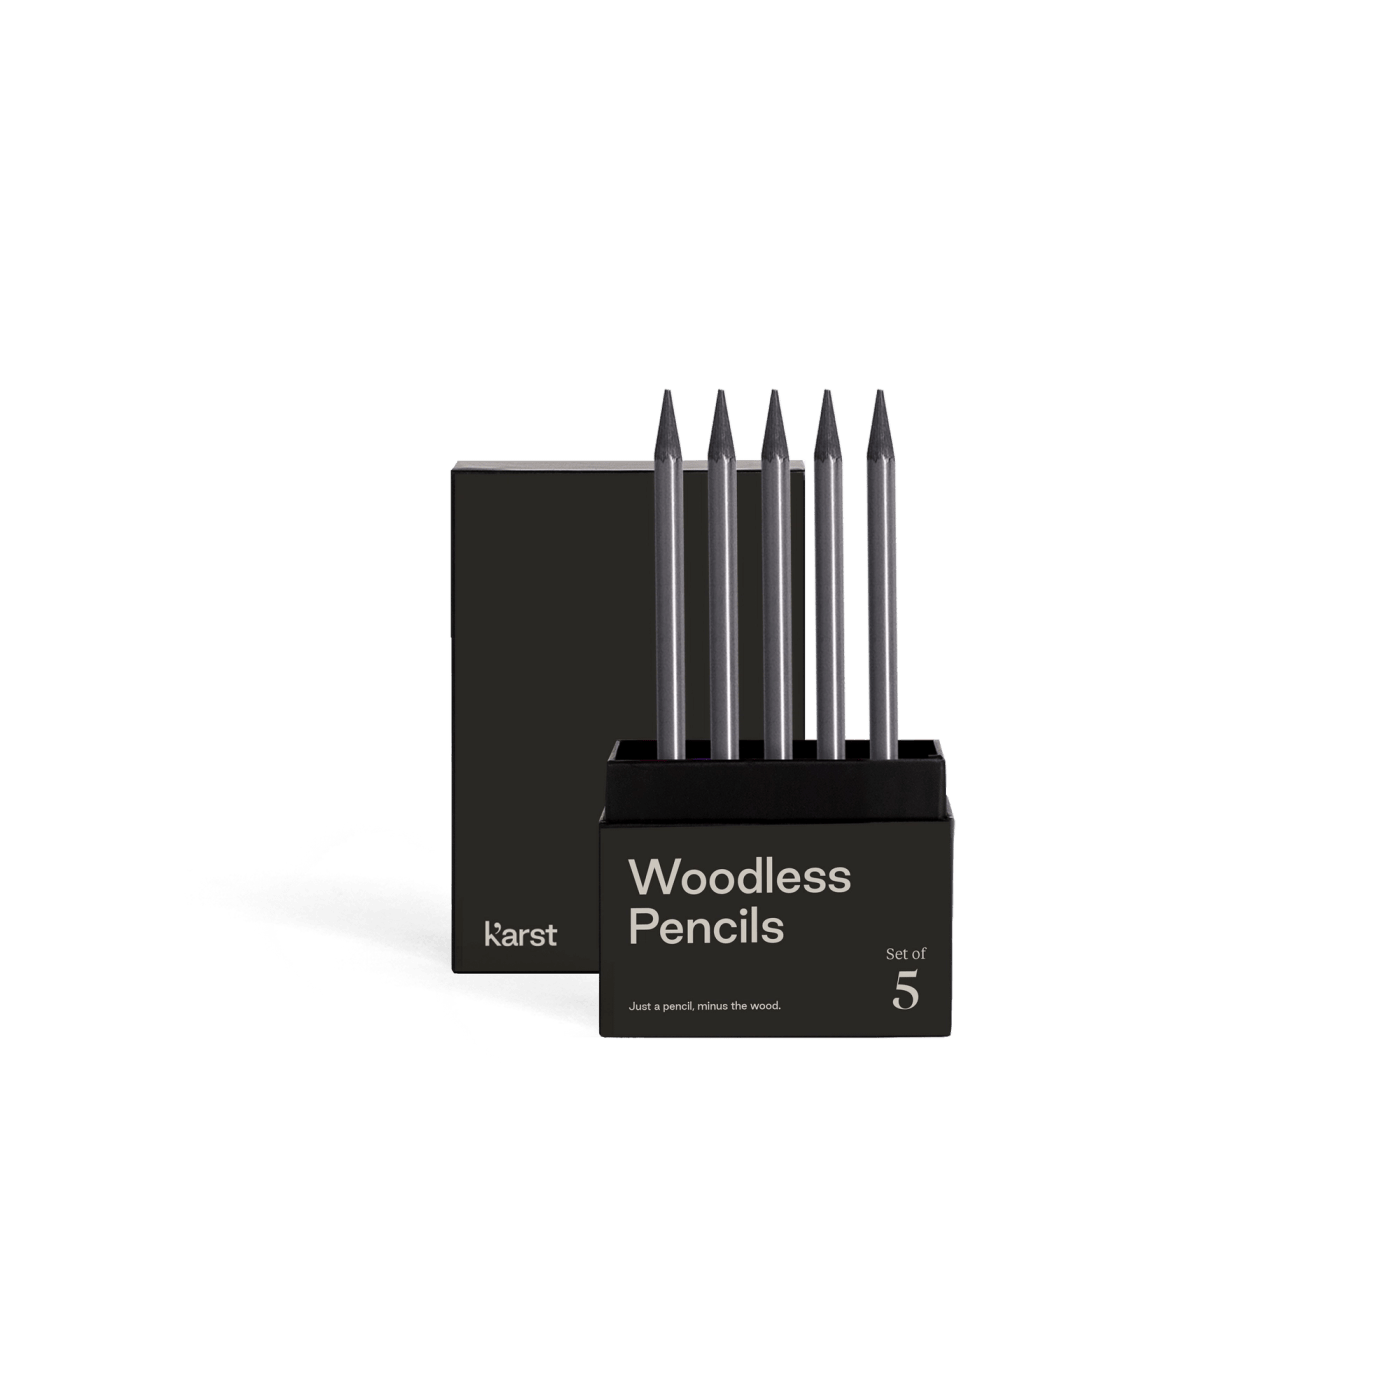 Custom Karst Woodless Pencils - Corporate Gifts